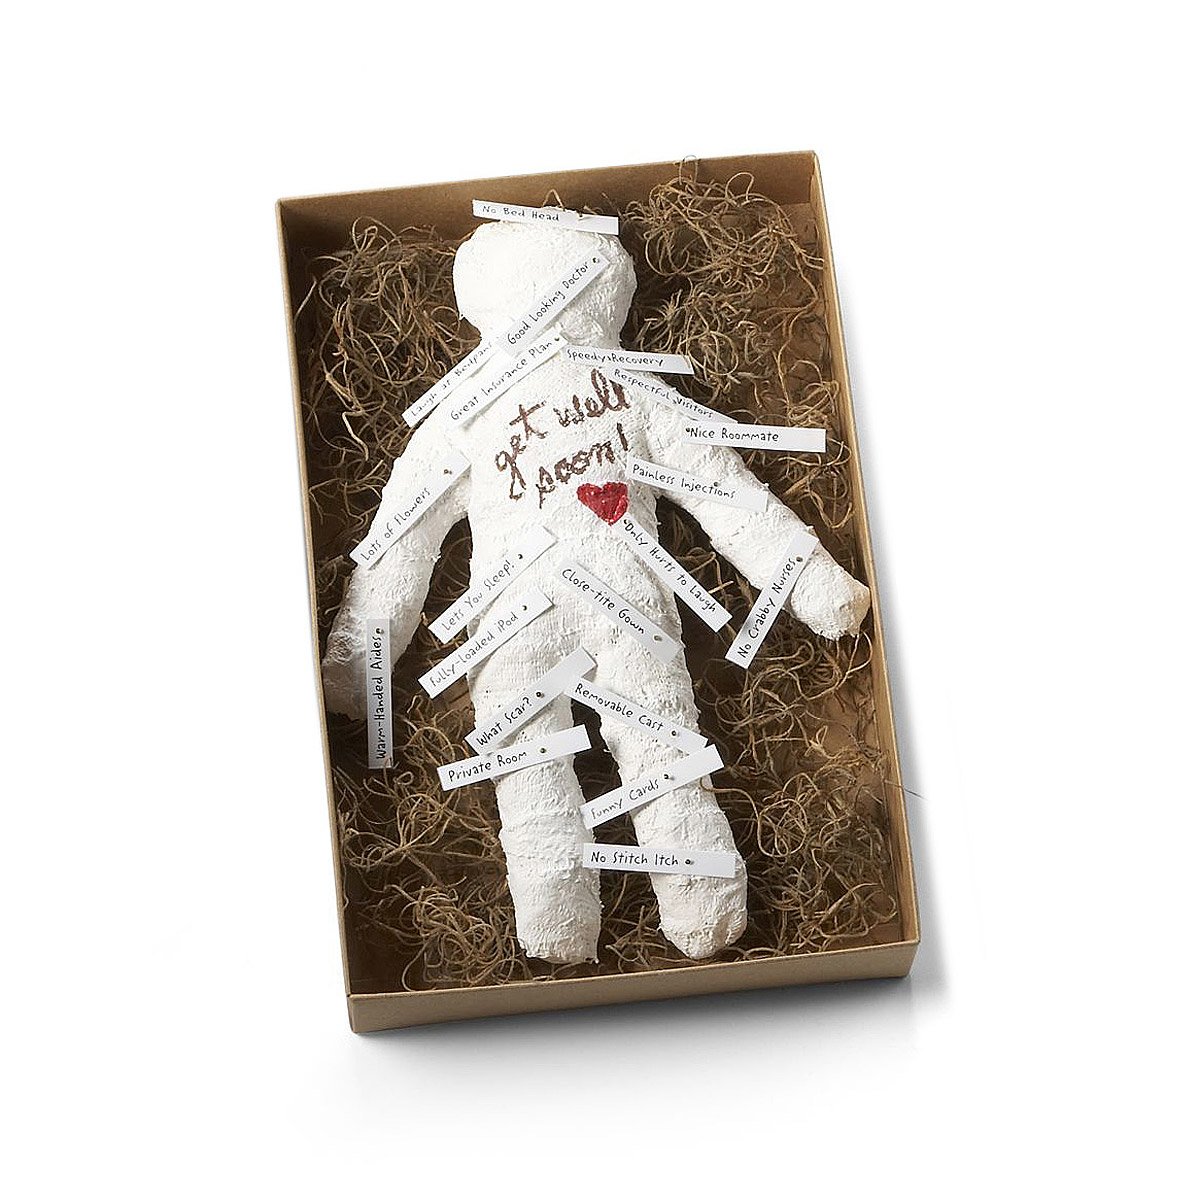 How do you use a voodoo doll?